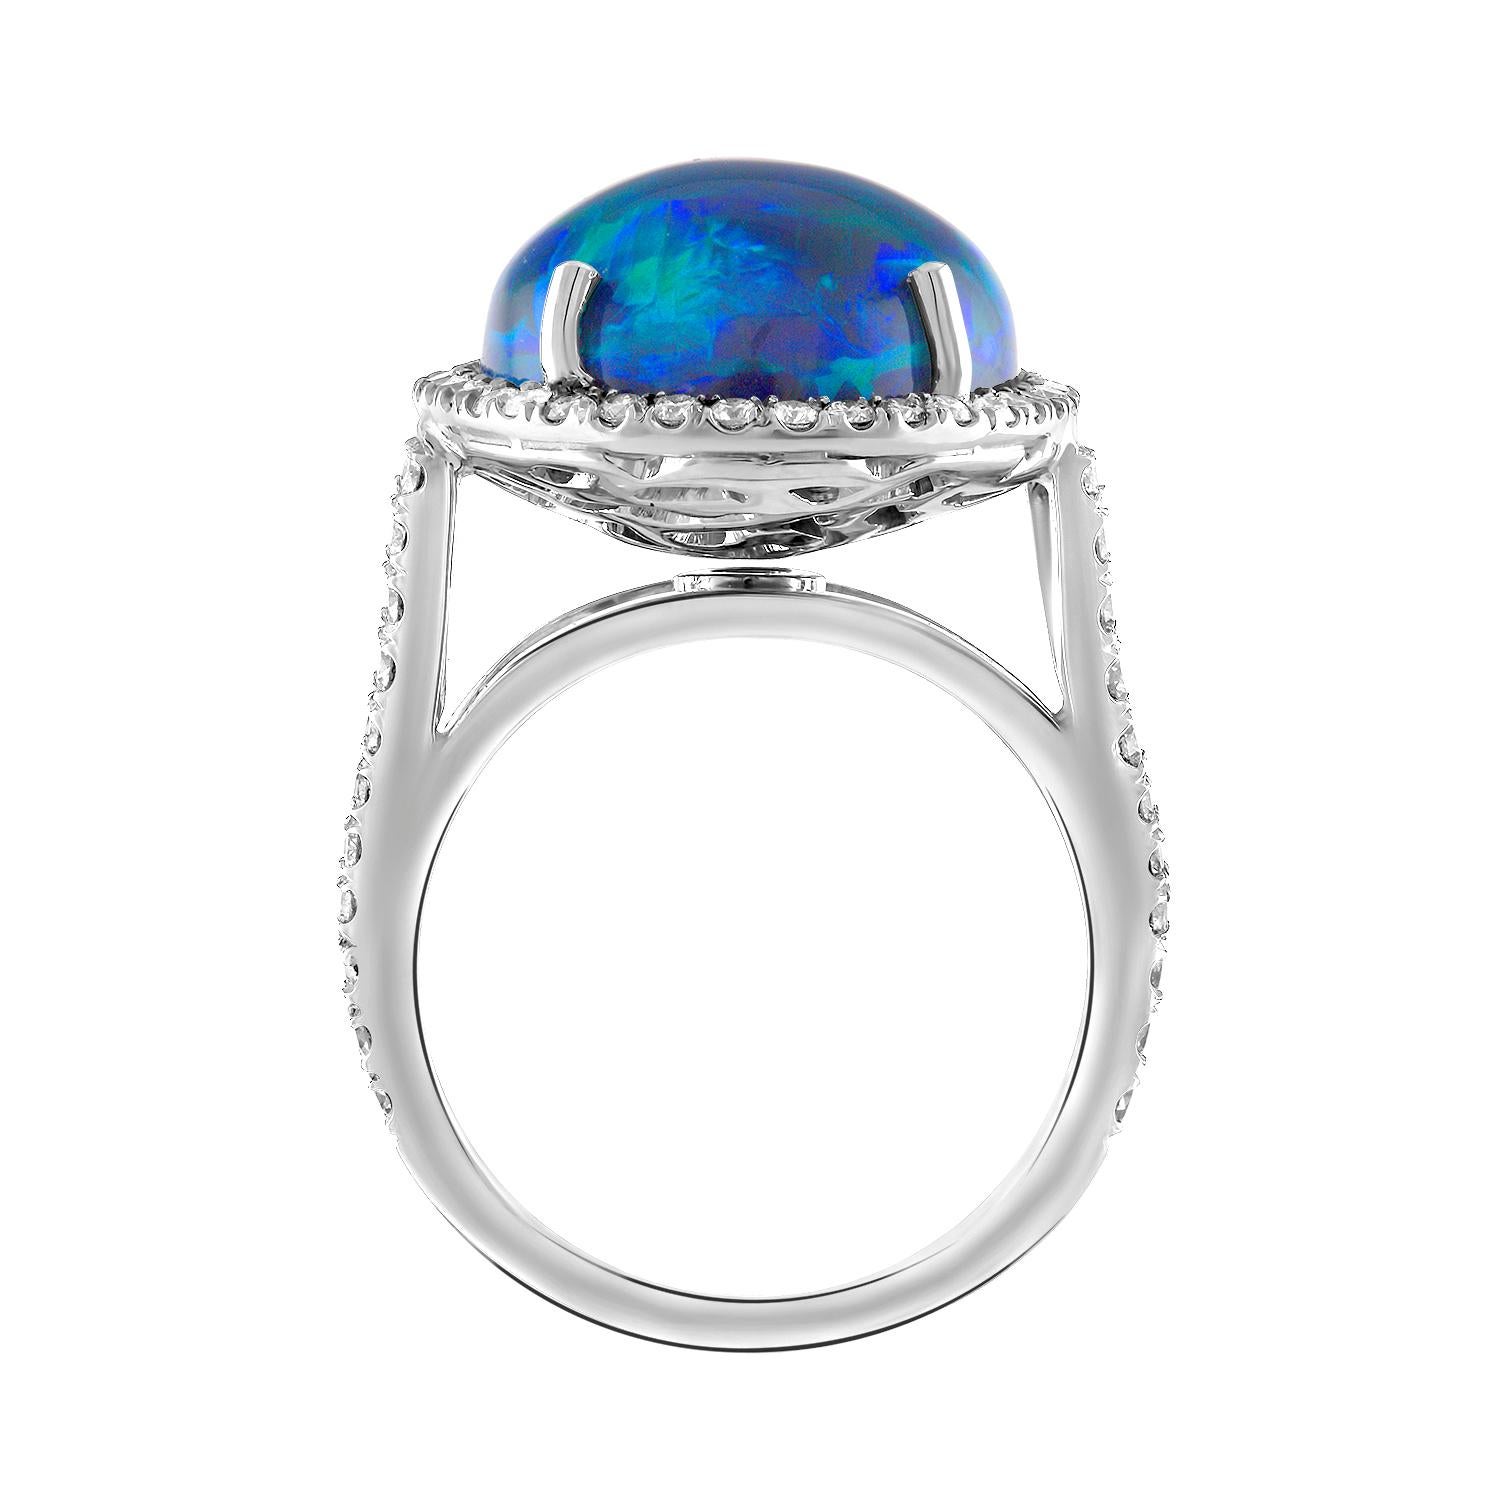 Shah & Shah's handmade platinum and 0.85 carat F/VS round brilliant cut diamond ring with a 12.31 carat Lightning Ridge Australian Black Opal.

The ring is a size 6.5. Initial sizing is complimentary and an insurance appraisal is included with your